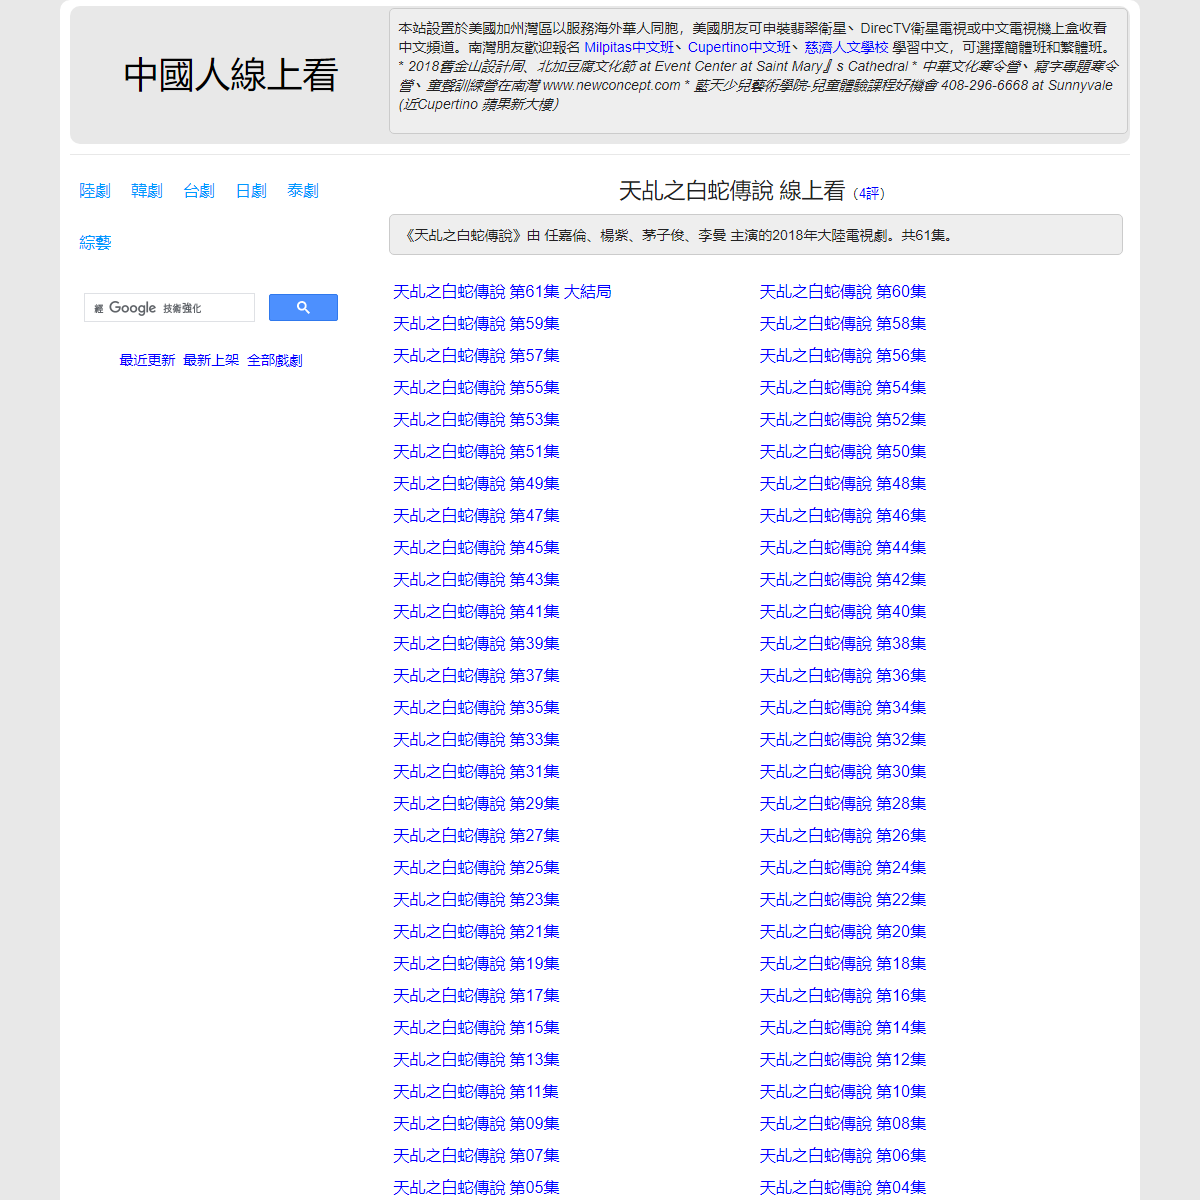 A complete backup of https://chinaq.tv/cn180710/